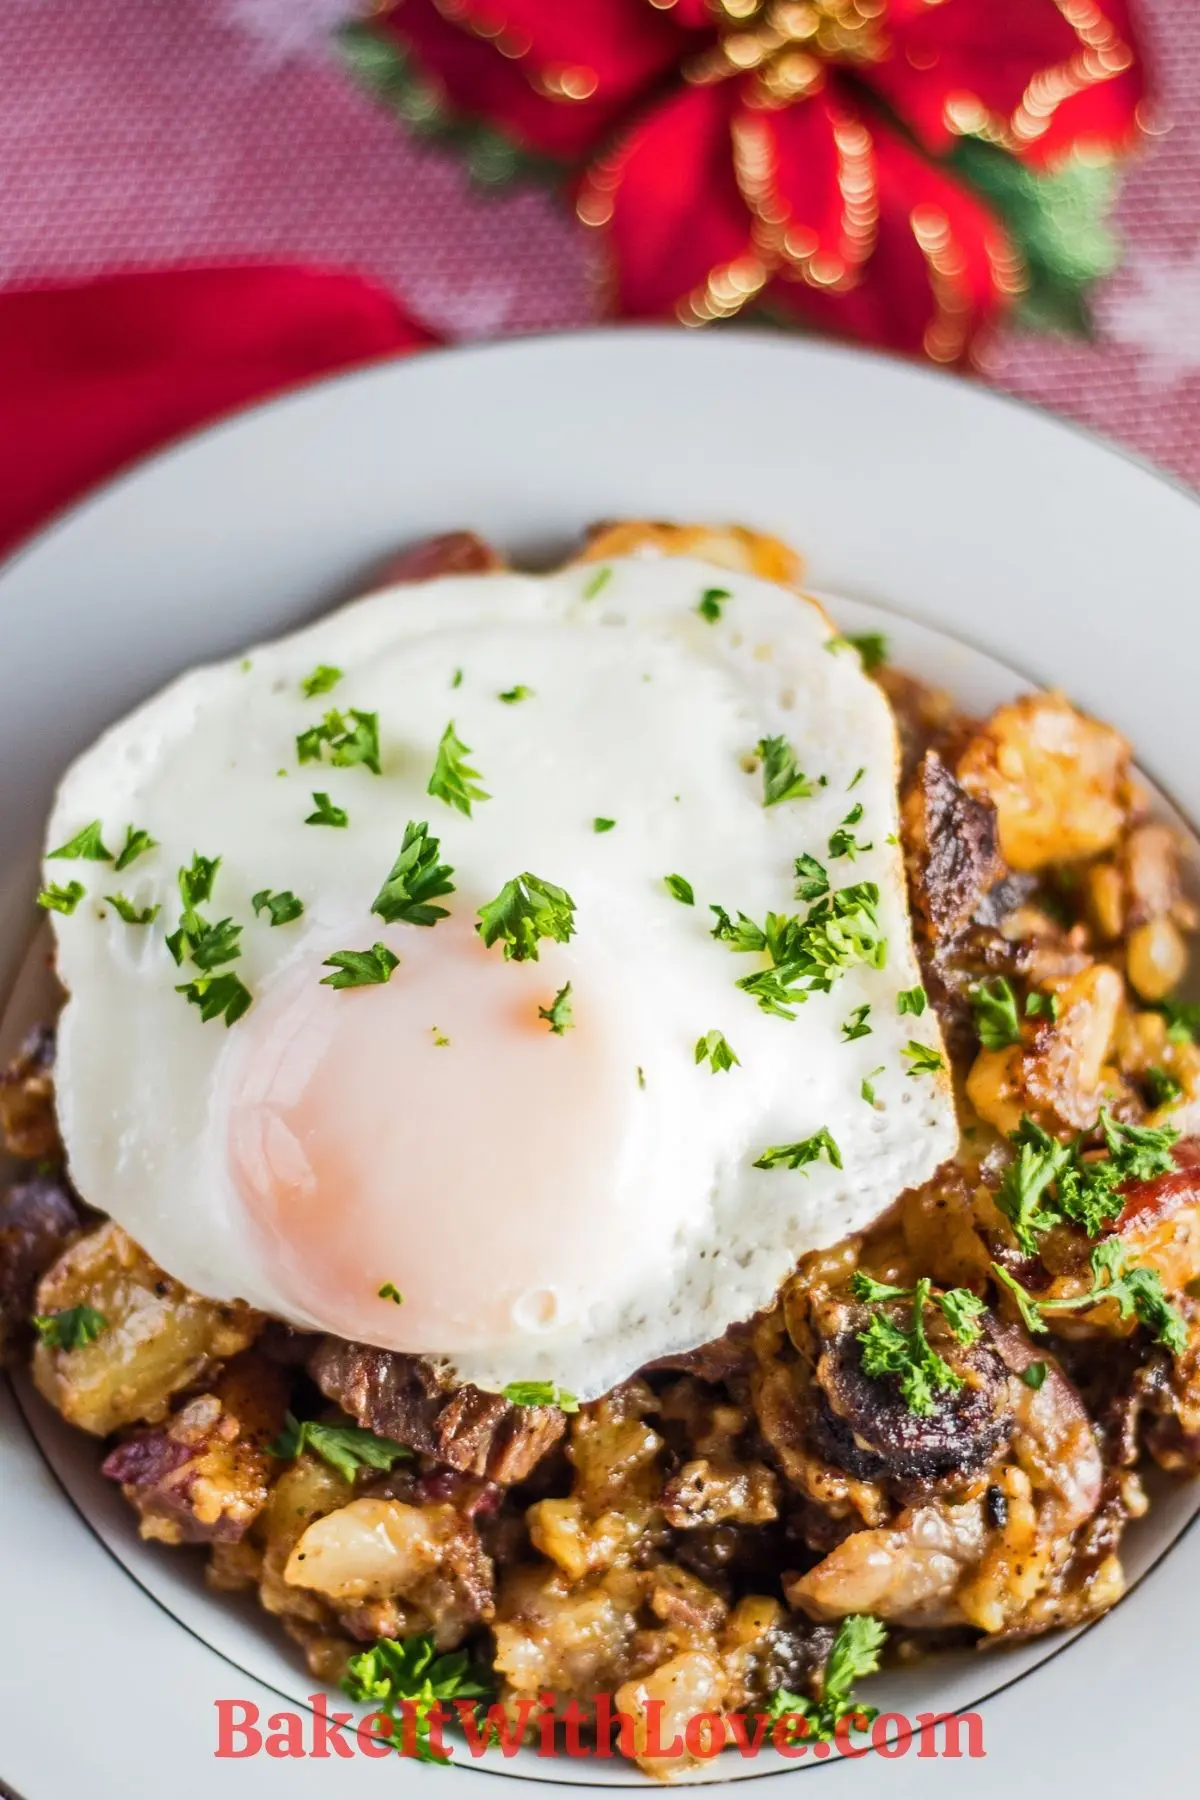 Leftover prime rib hash served with egg after the holidays.